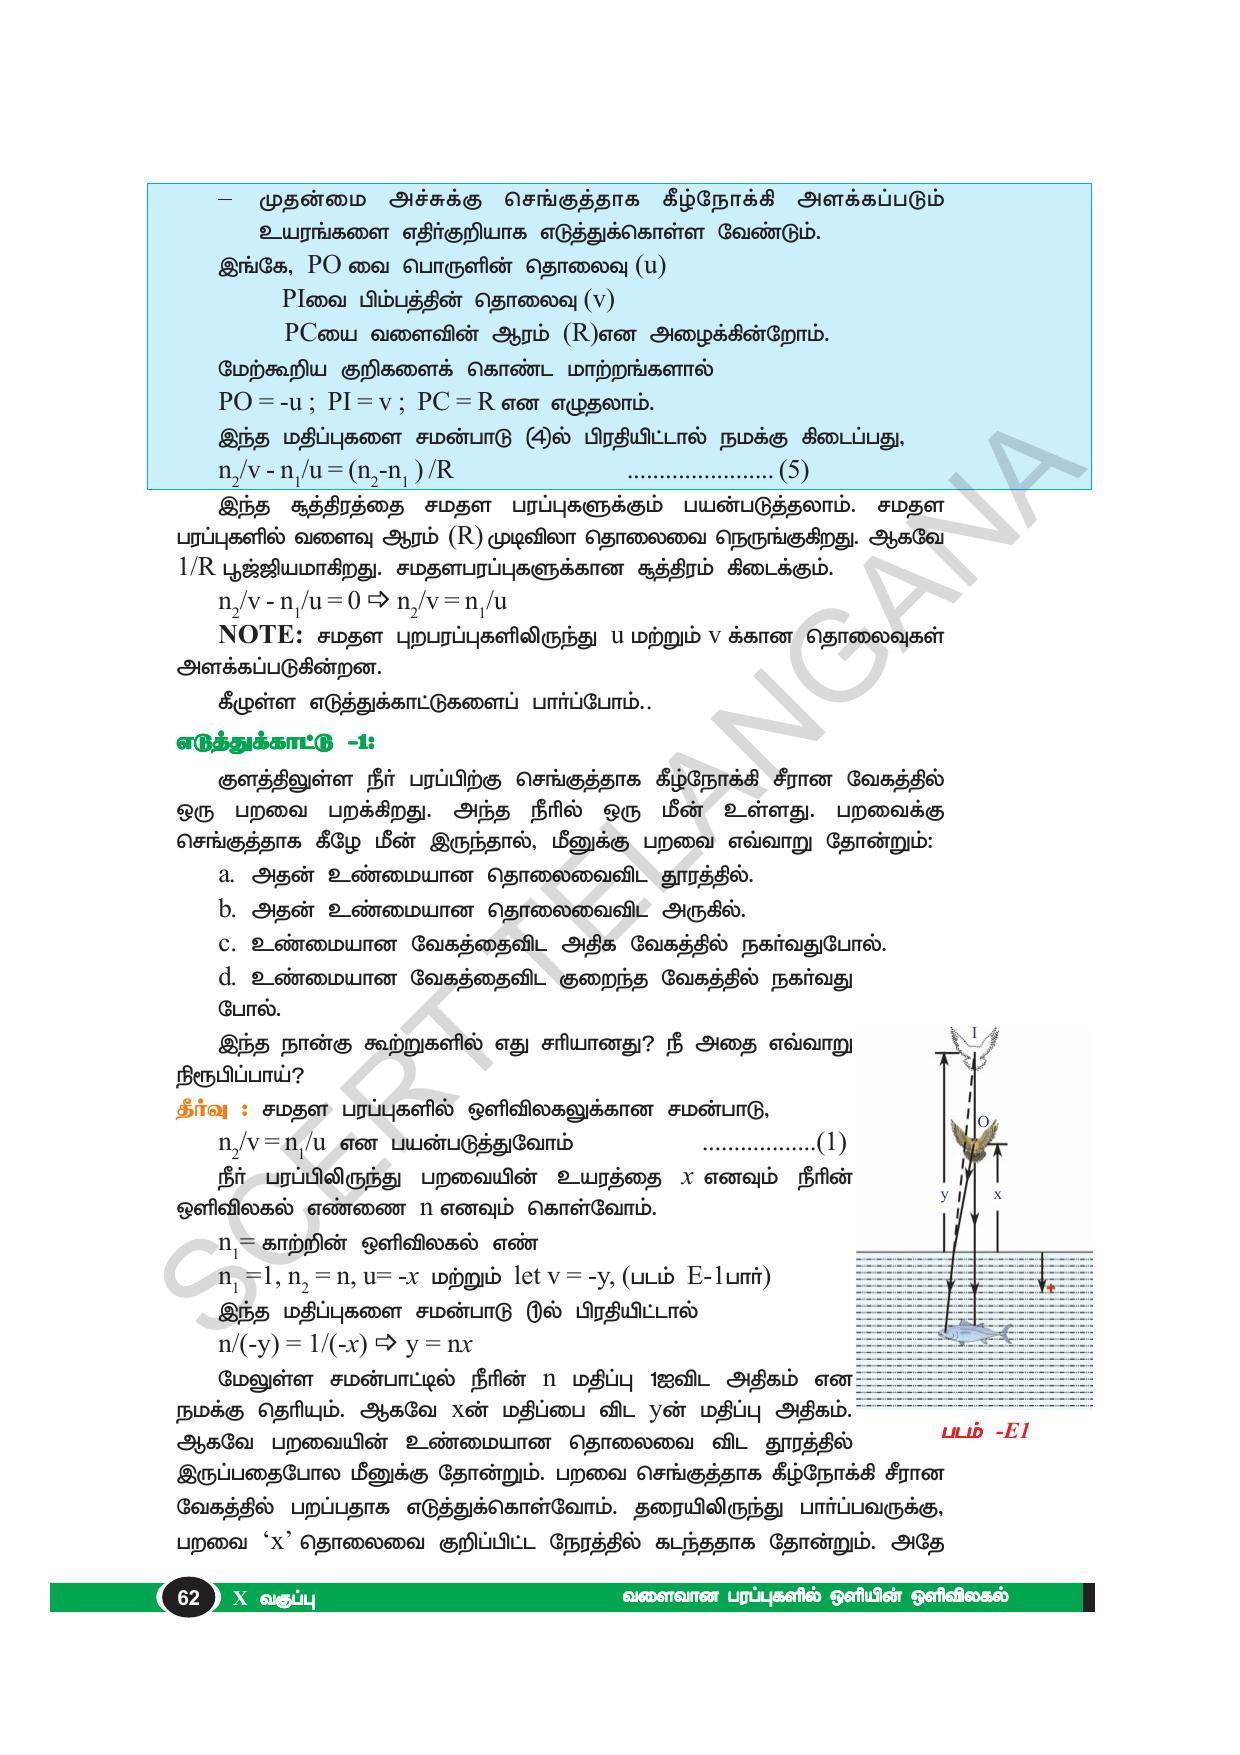 TS SCERT Class 10 Physical Science(Tamil Medium) Text Book - Page 74